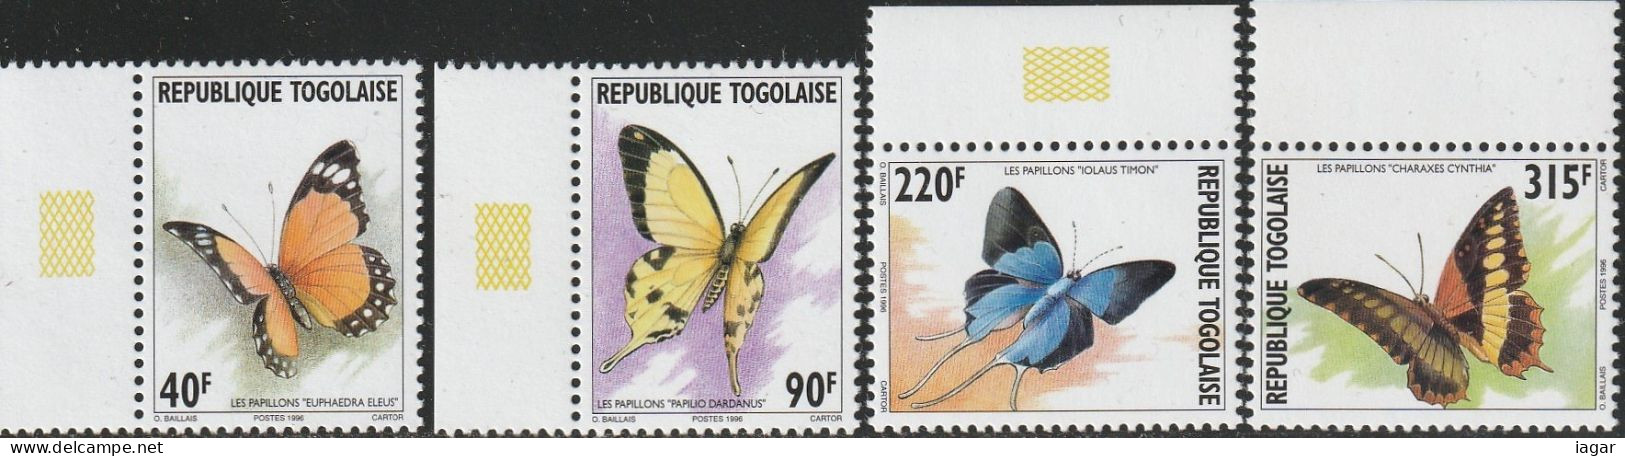 THEMATIC FAUNA: BUTTERFLIES       4v (1996)     -  TOGO - Papillons